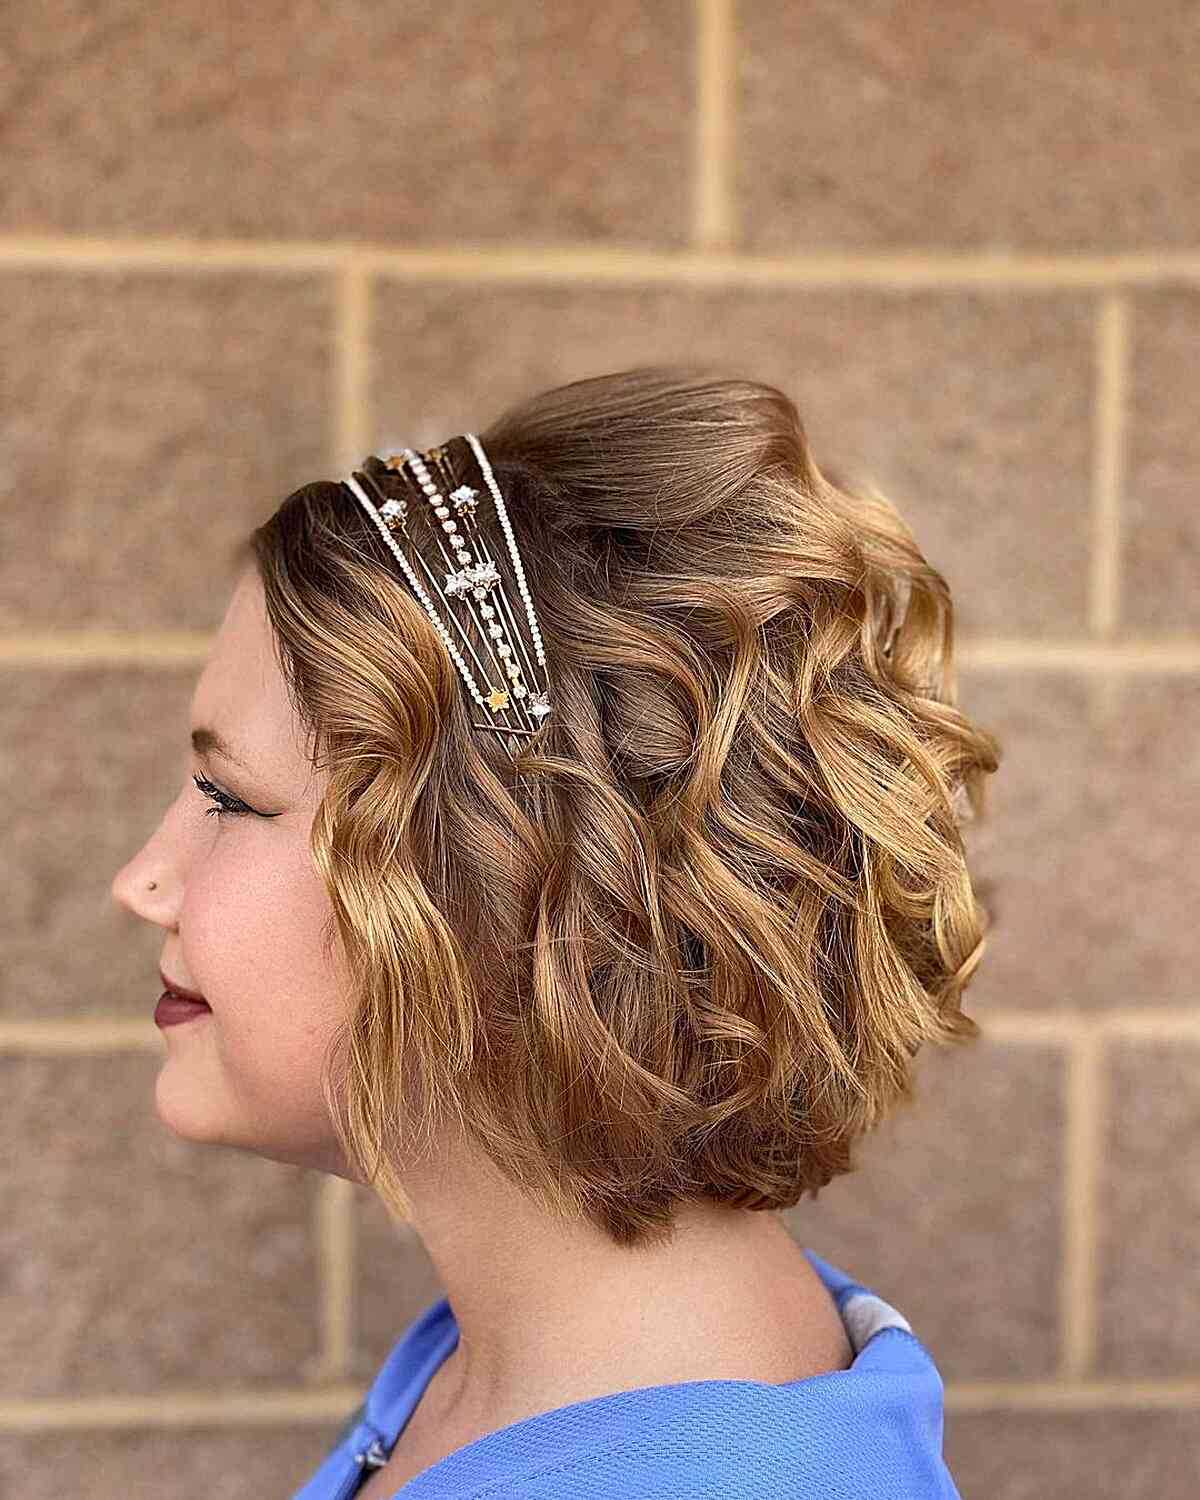 Short Airy Curls with a Headband for Prom